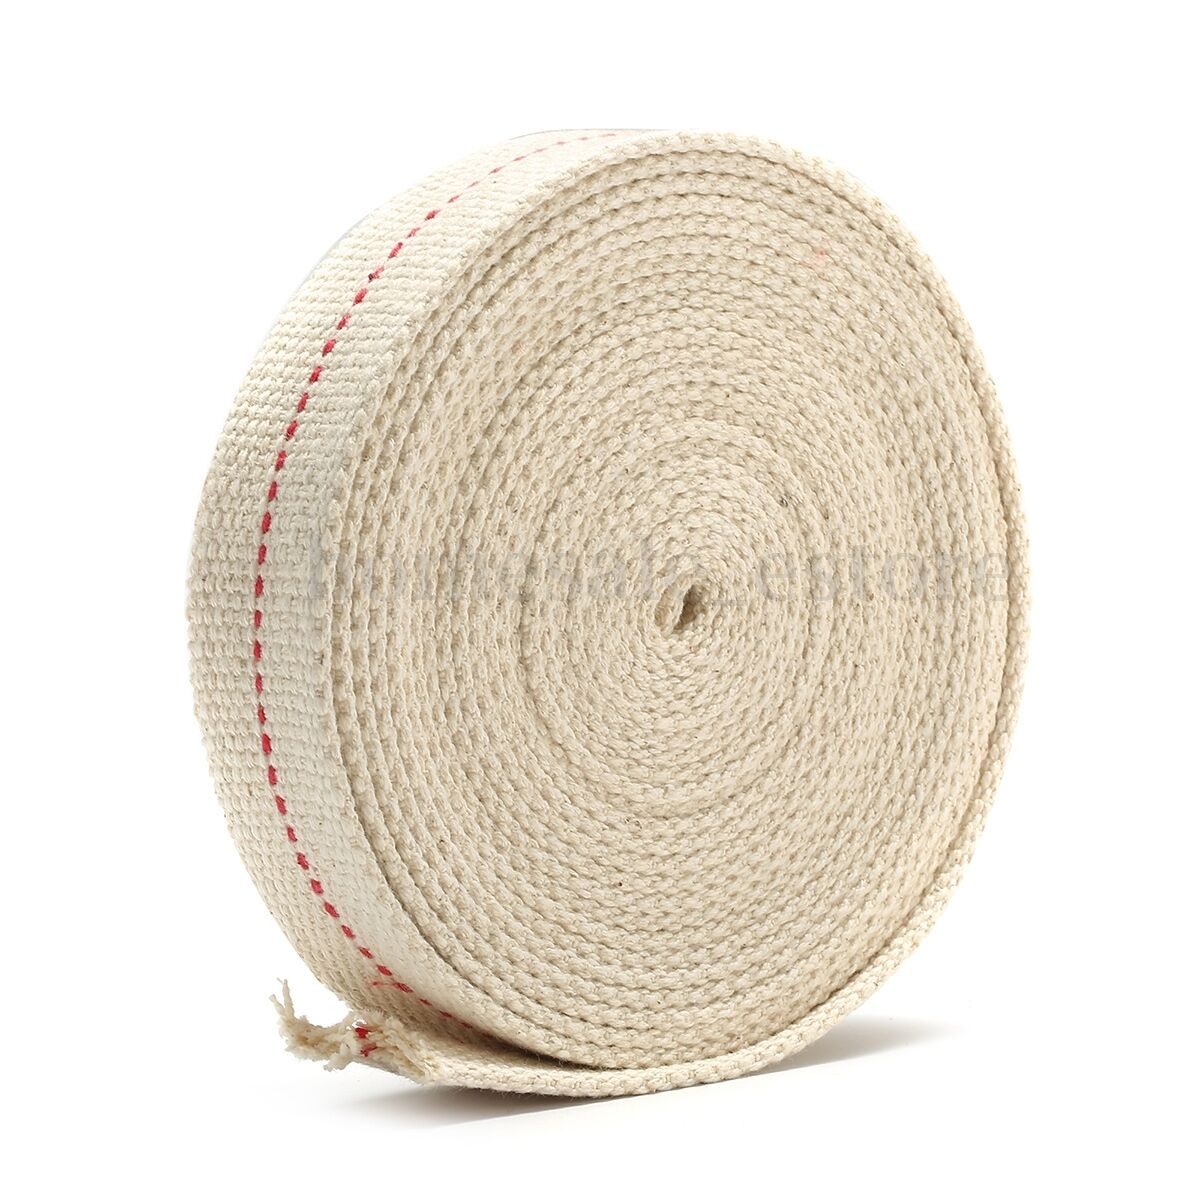 1'' 15ft 4.5m Roll Replacement White Flat Cotton Wick For Oil Lamps Lanterns